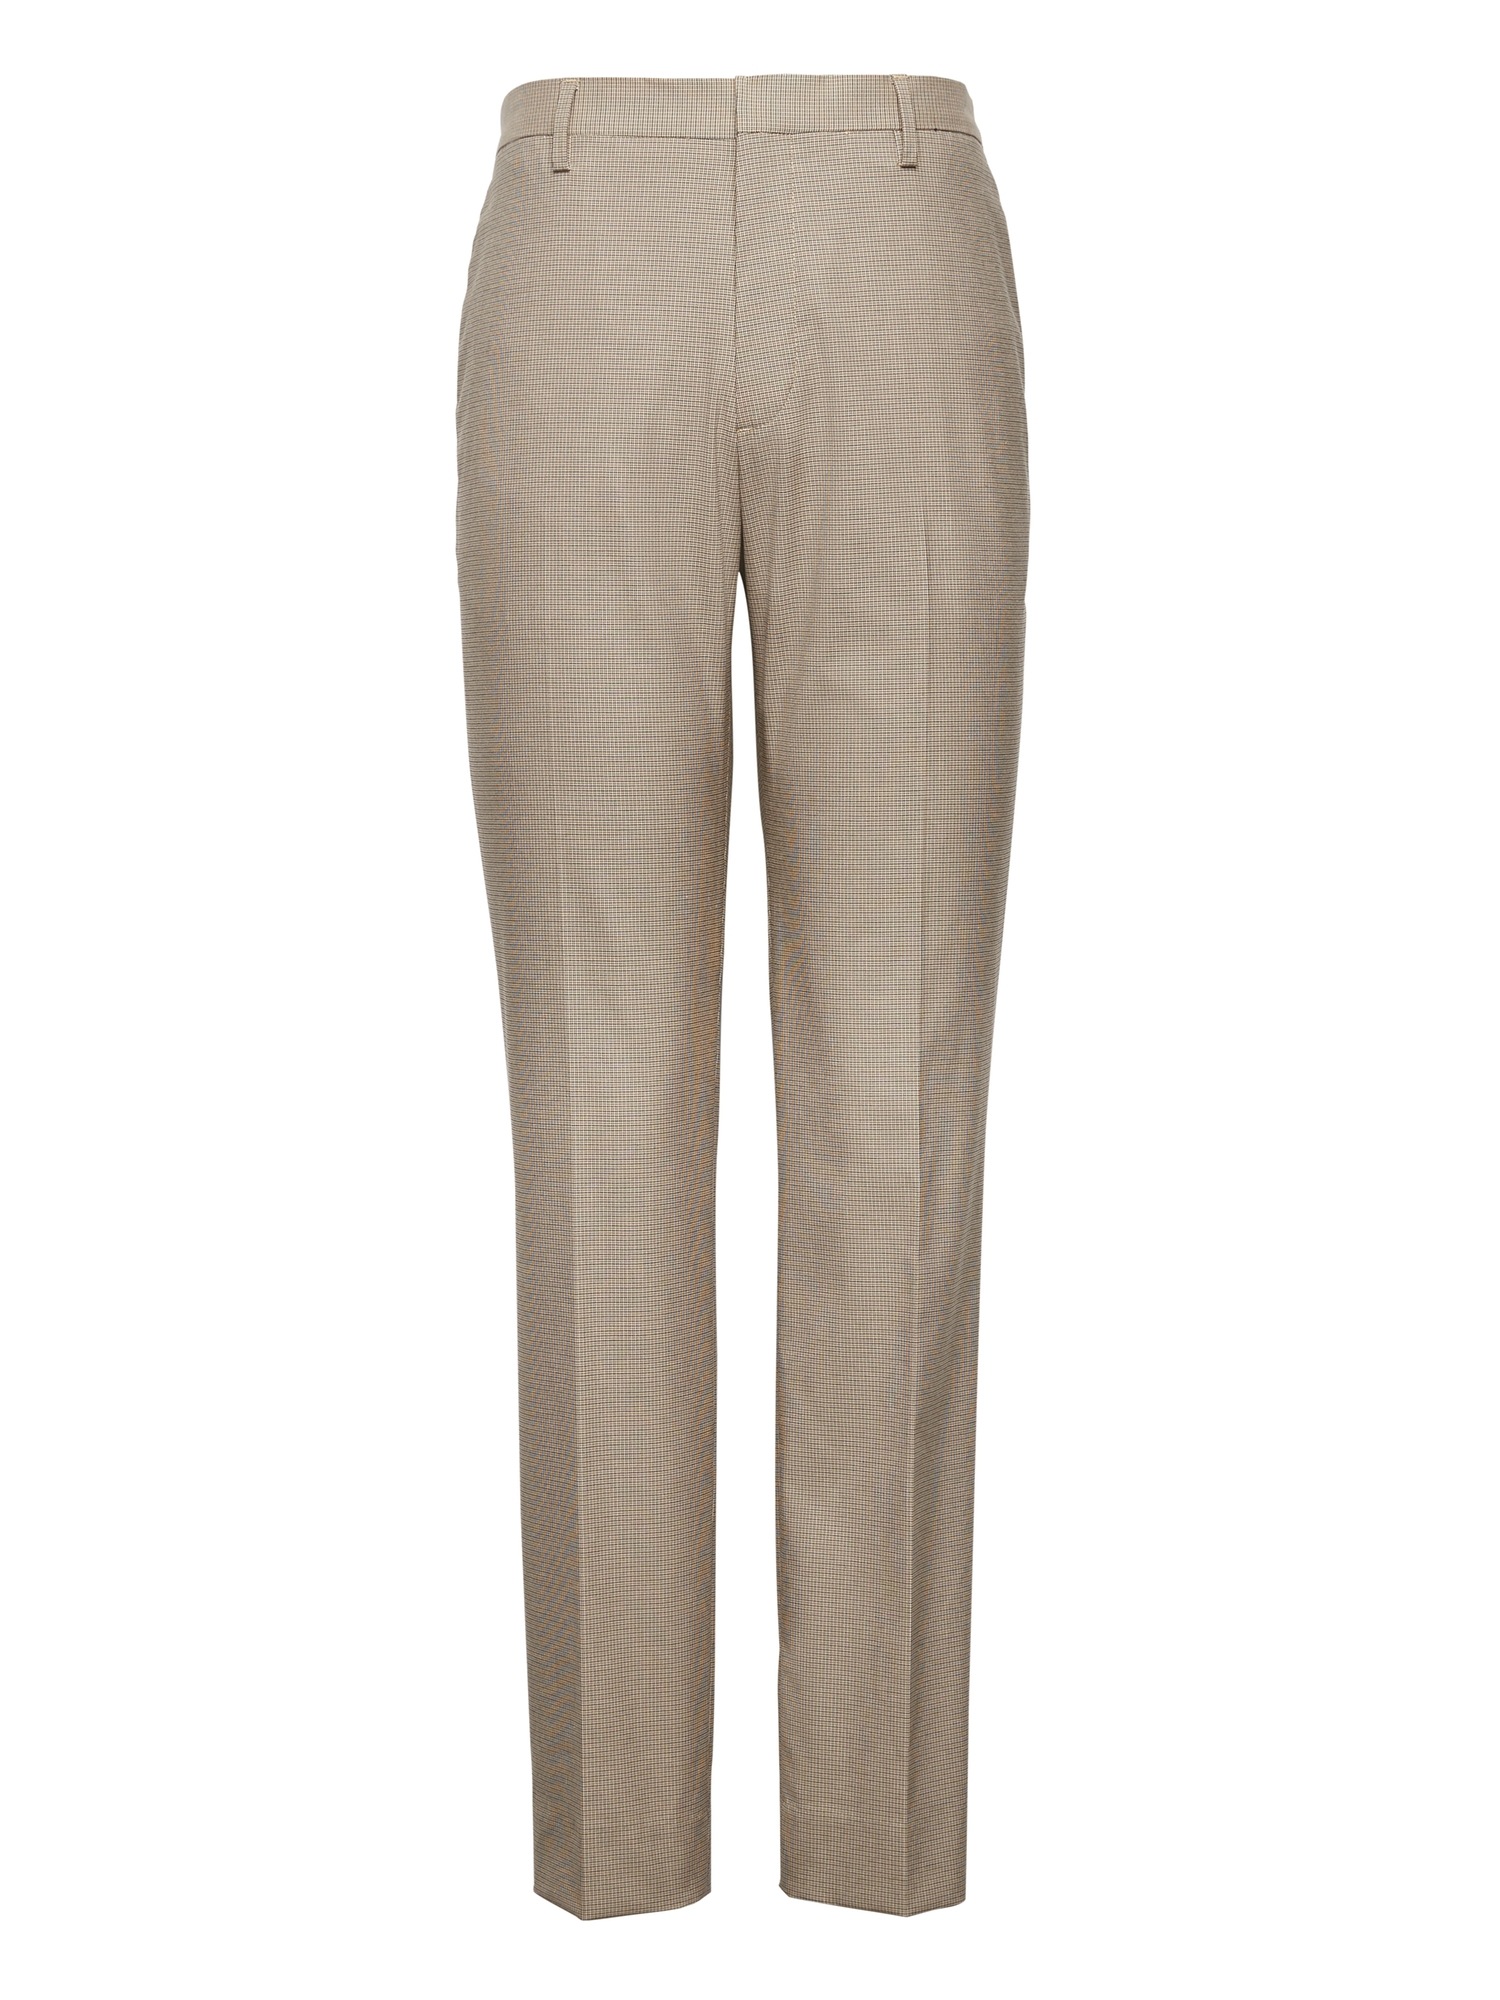 Athletic Tapered Non-Iron Stretch Cotton Houndstooth Pant